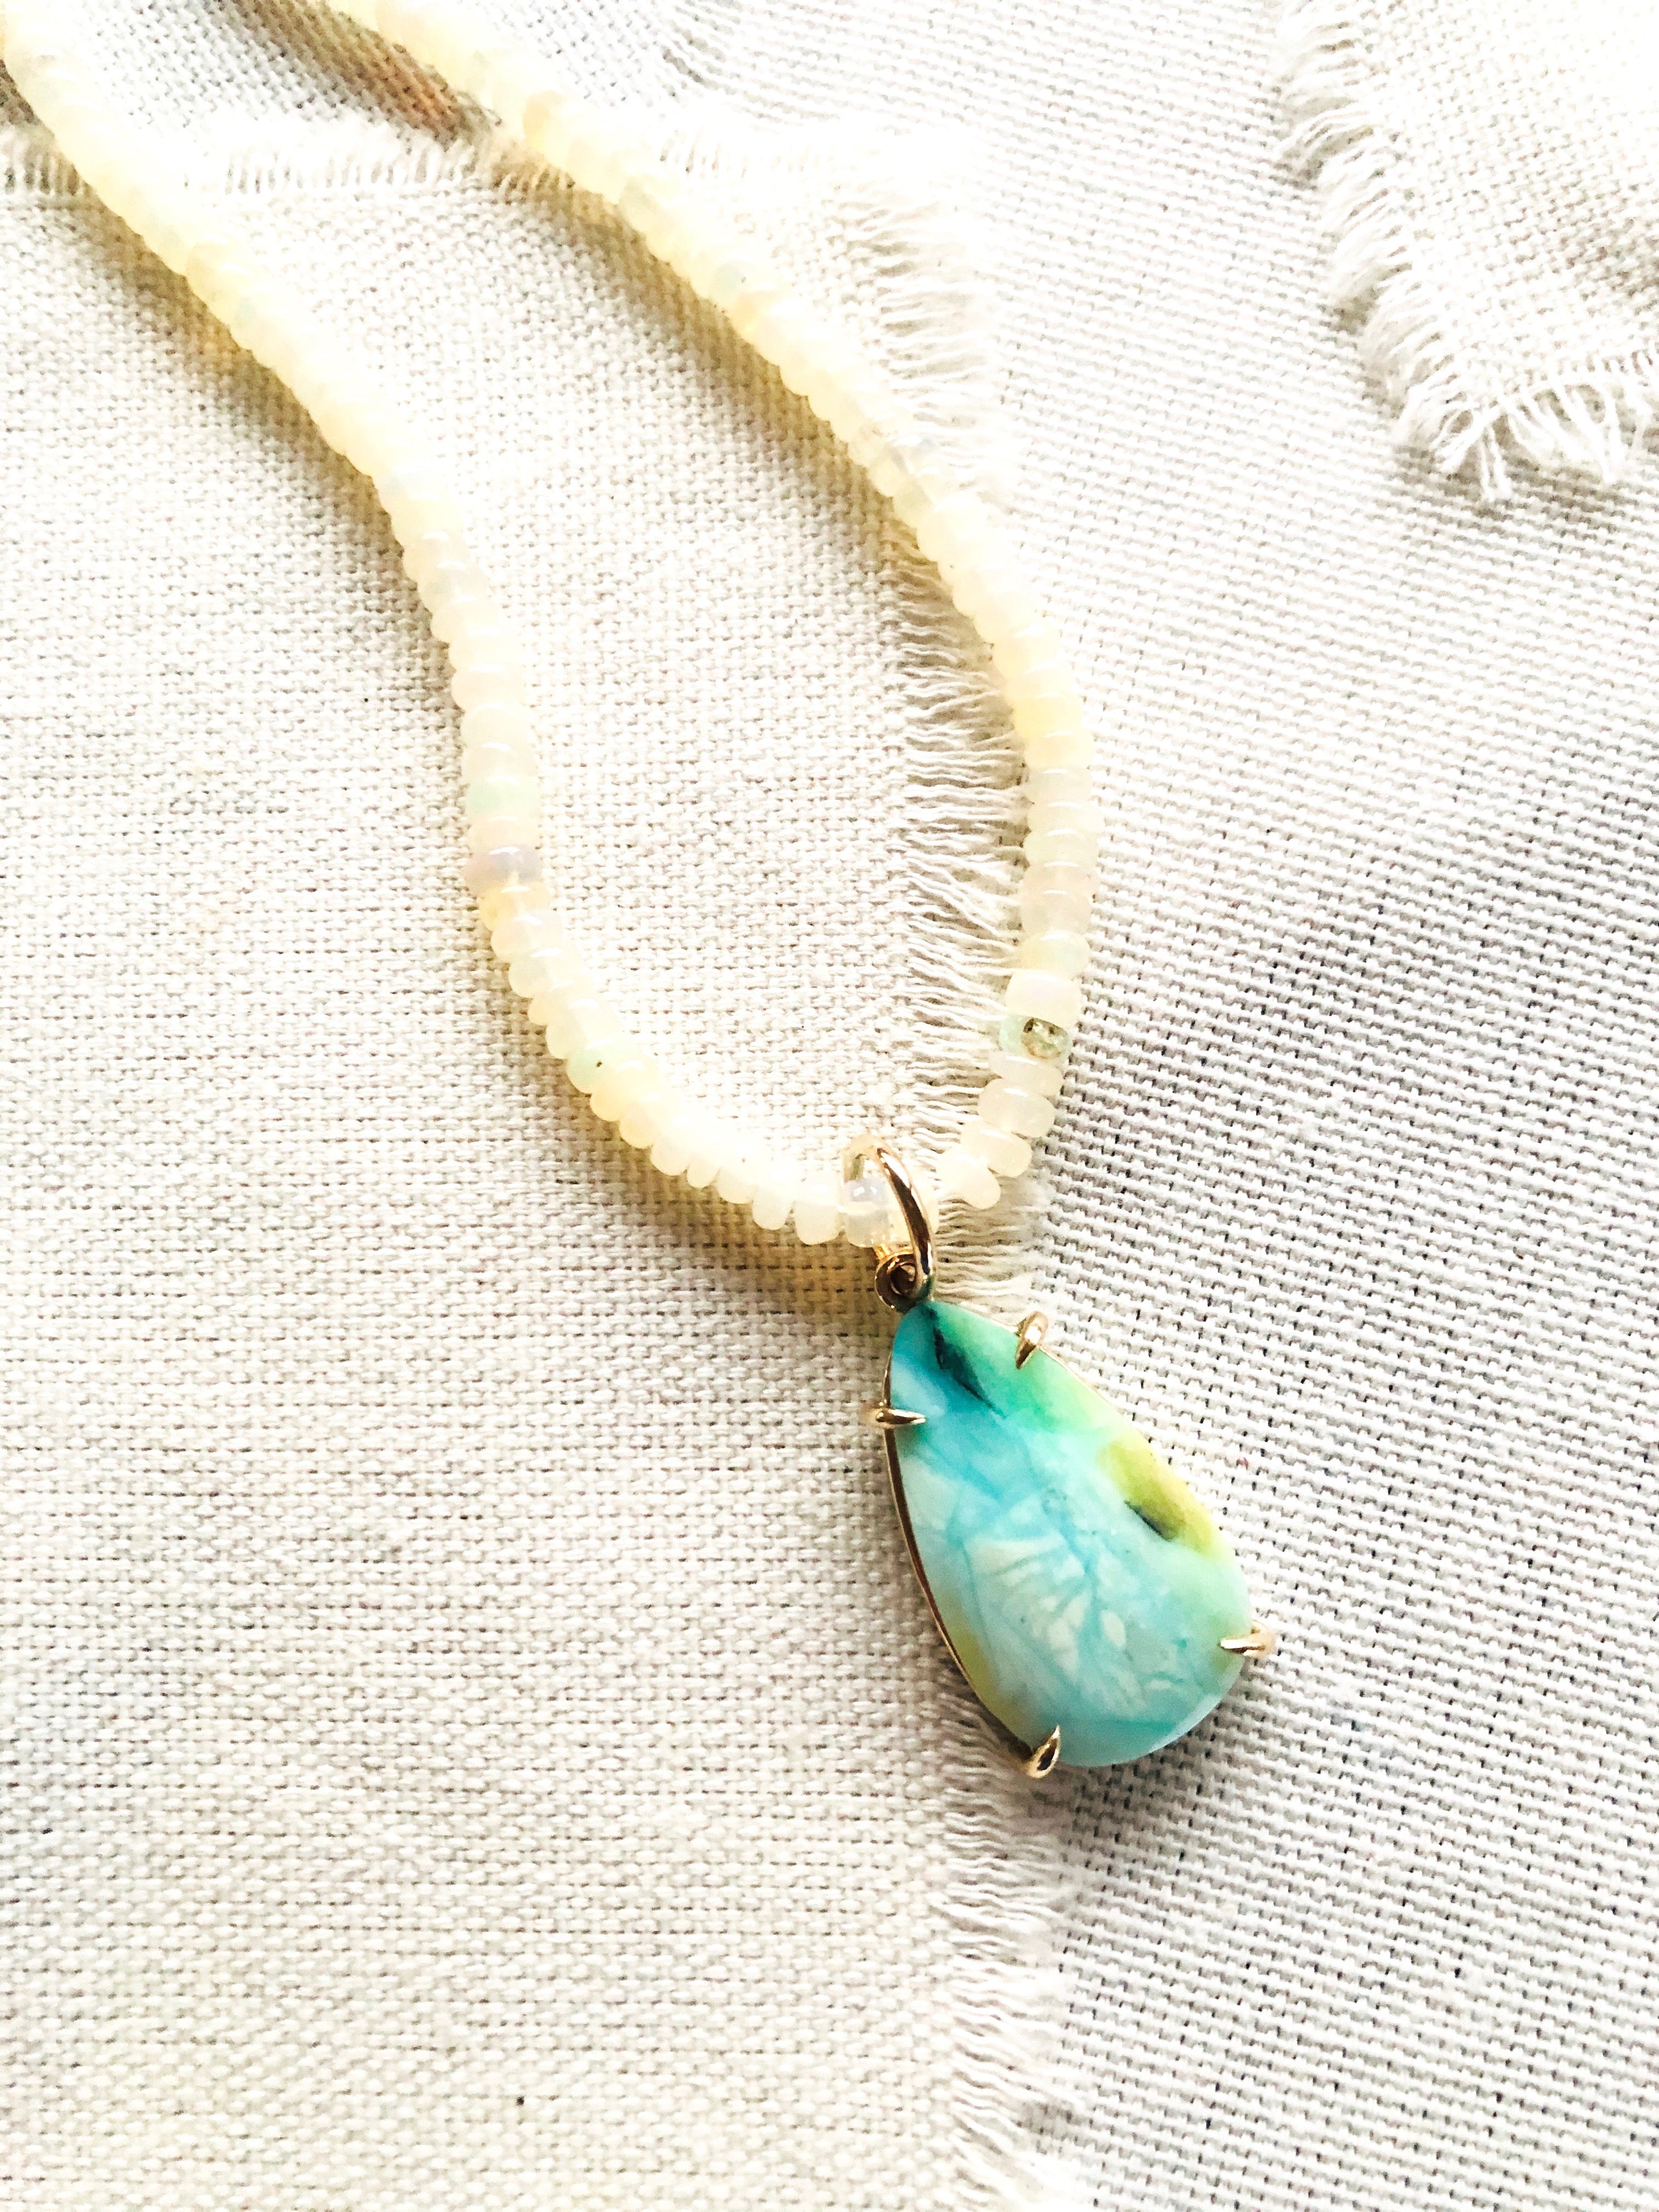 This is a beautiful blue opalized fossilized Indonesian wood pendant strung on Ethiopian Opal beads that reminds me of a confluence of rivers in snow and ice.  